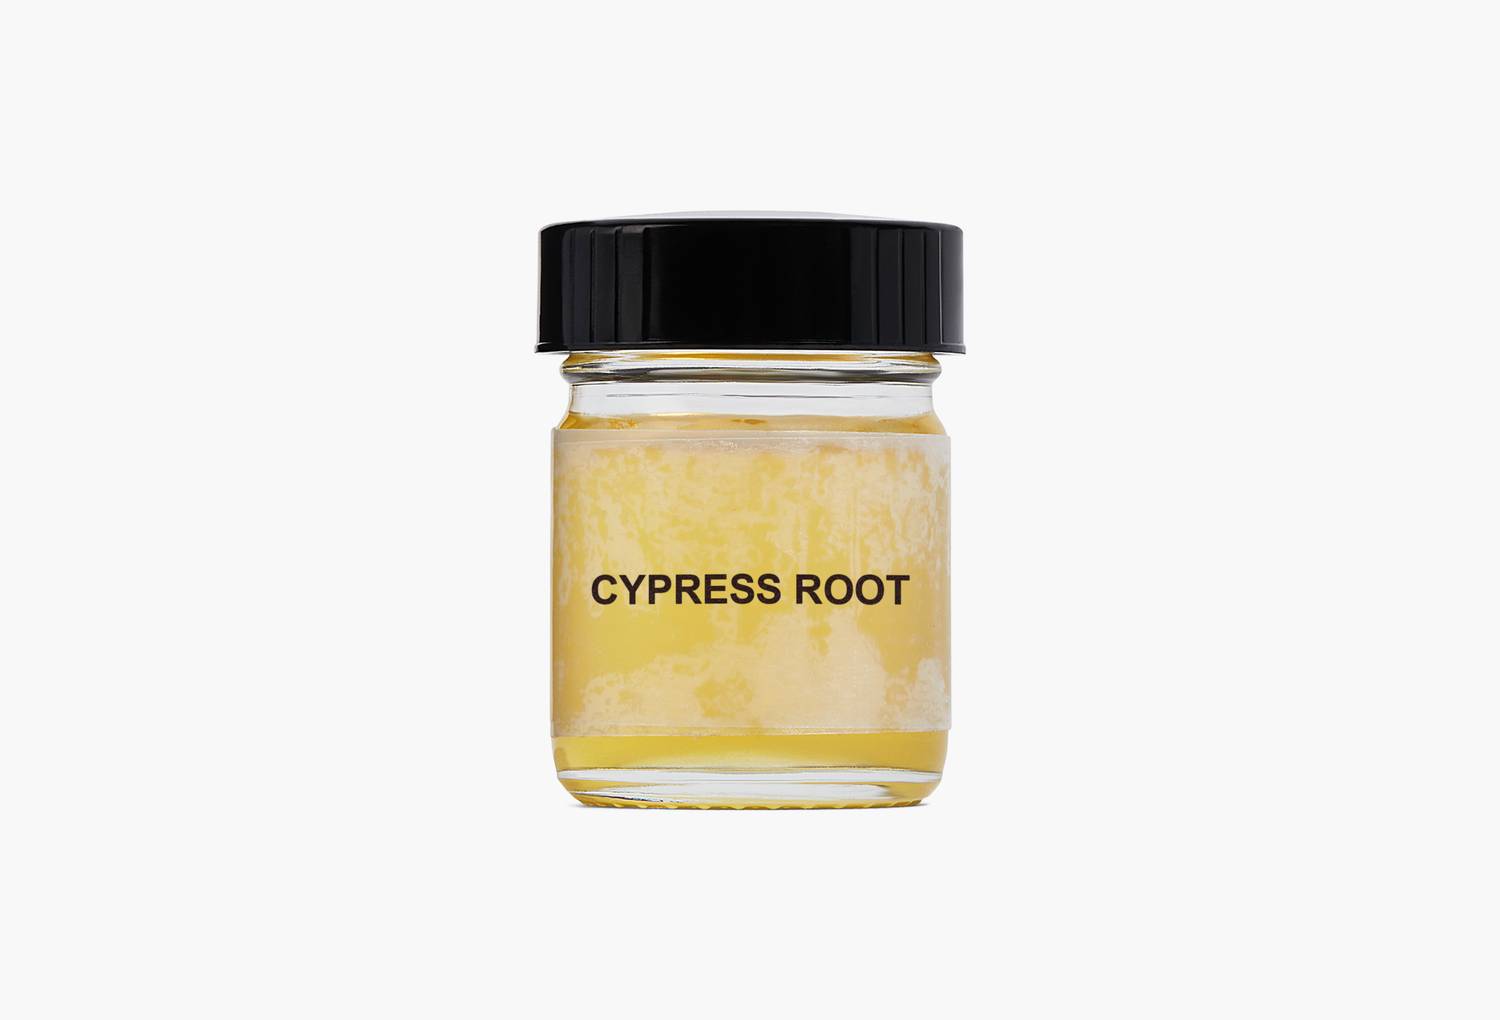 Cypress Root in natural form